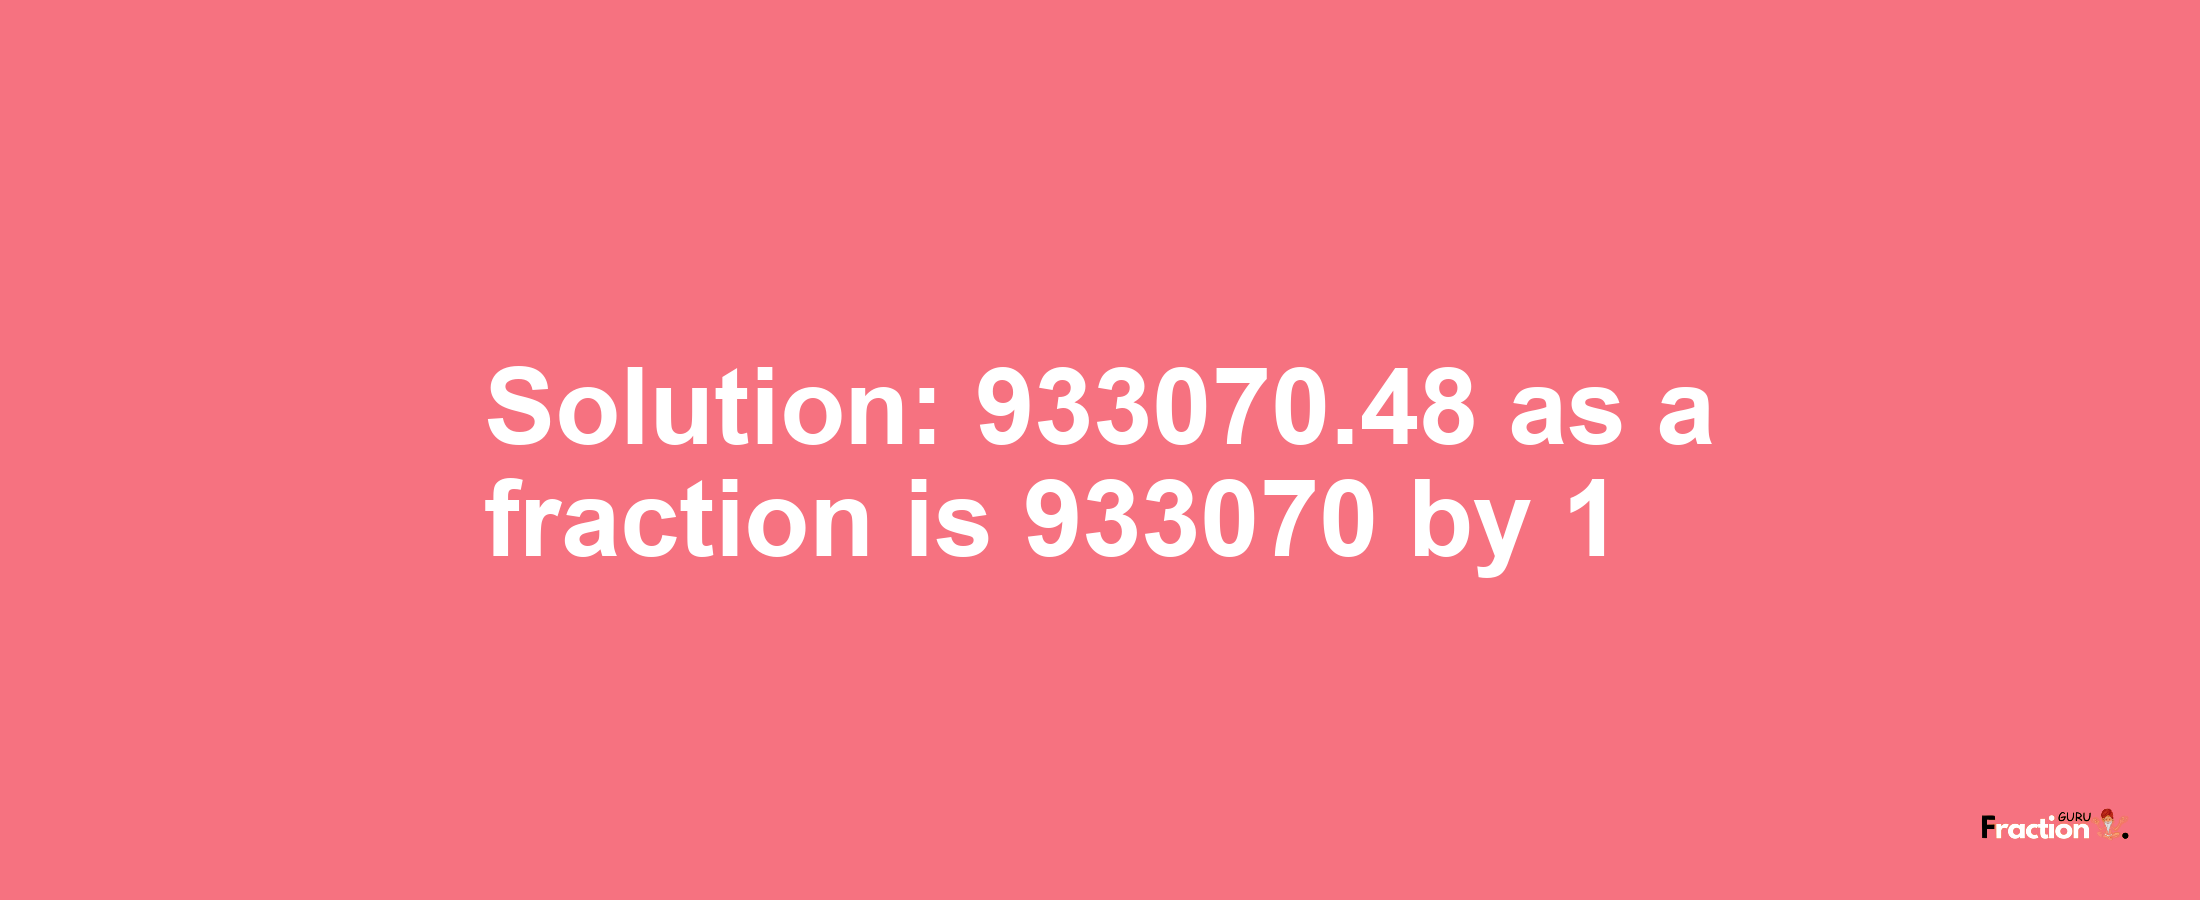 Solution:933070.48 as a fraction is 933070/1